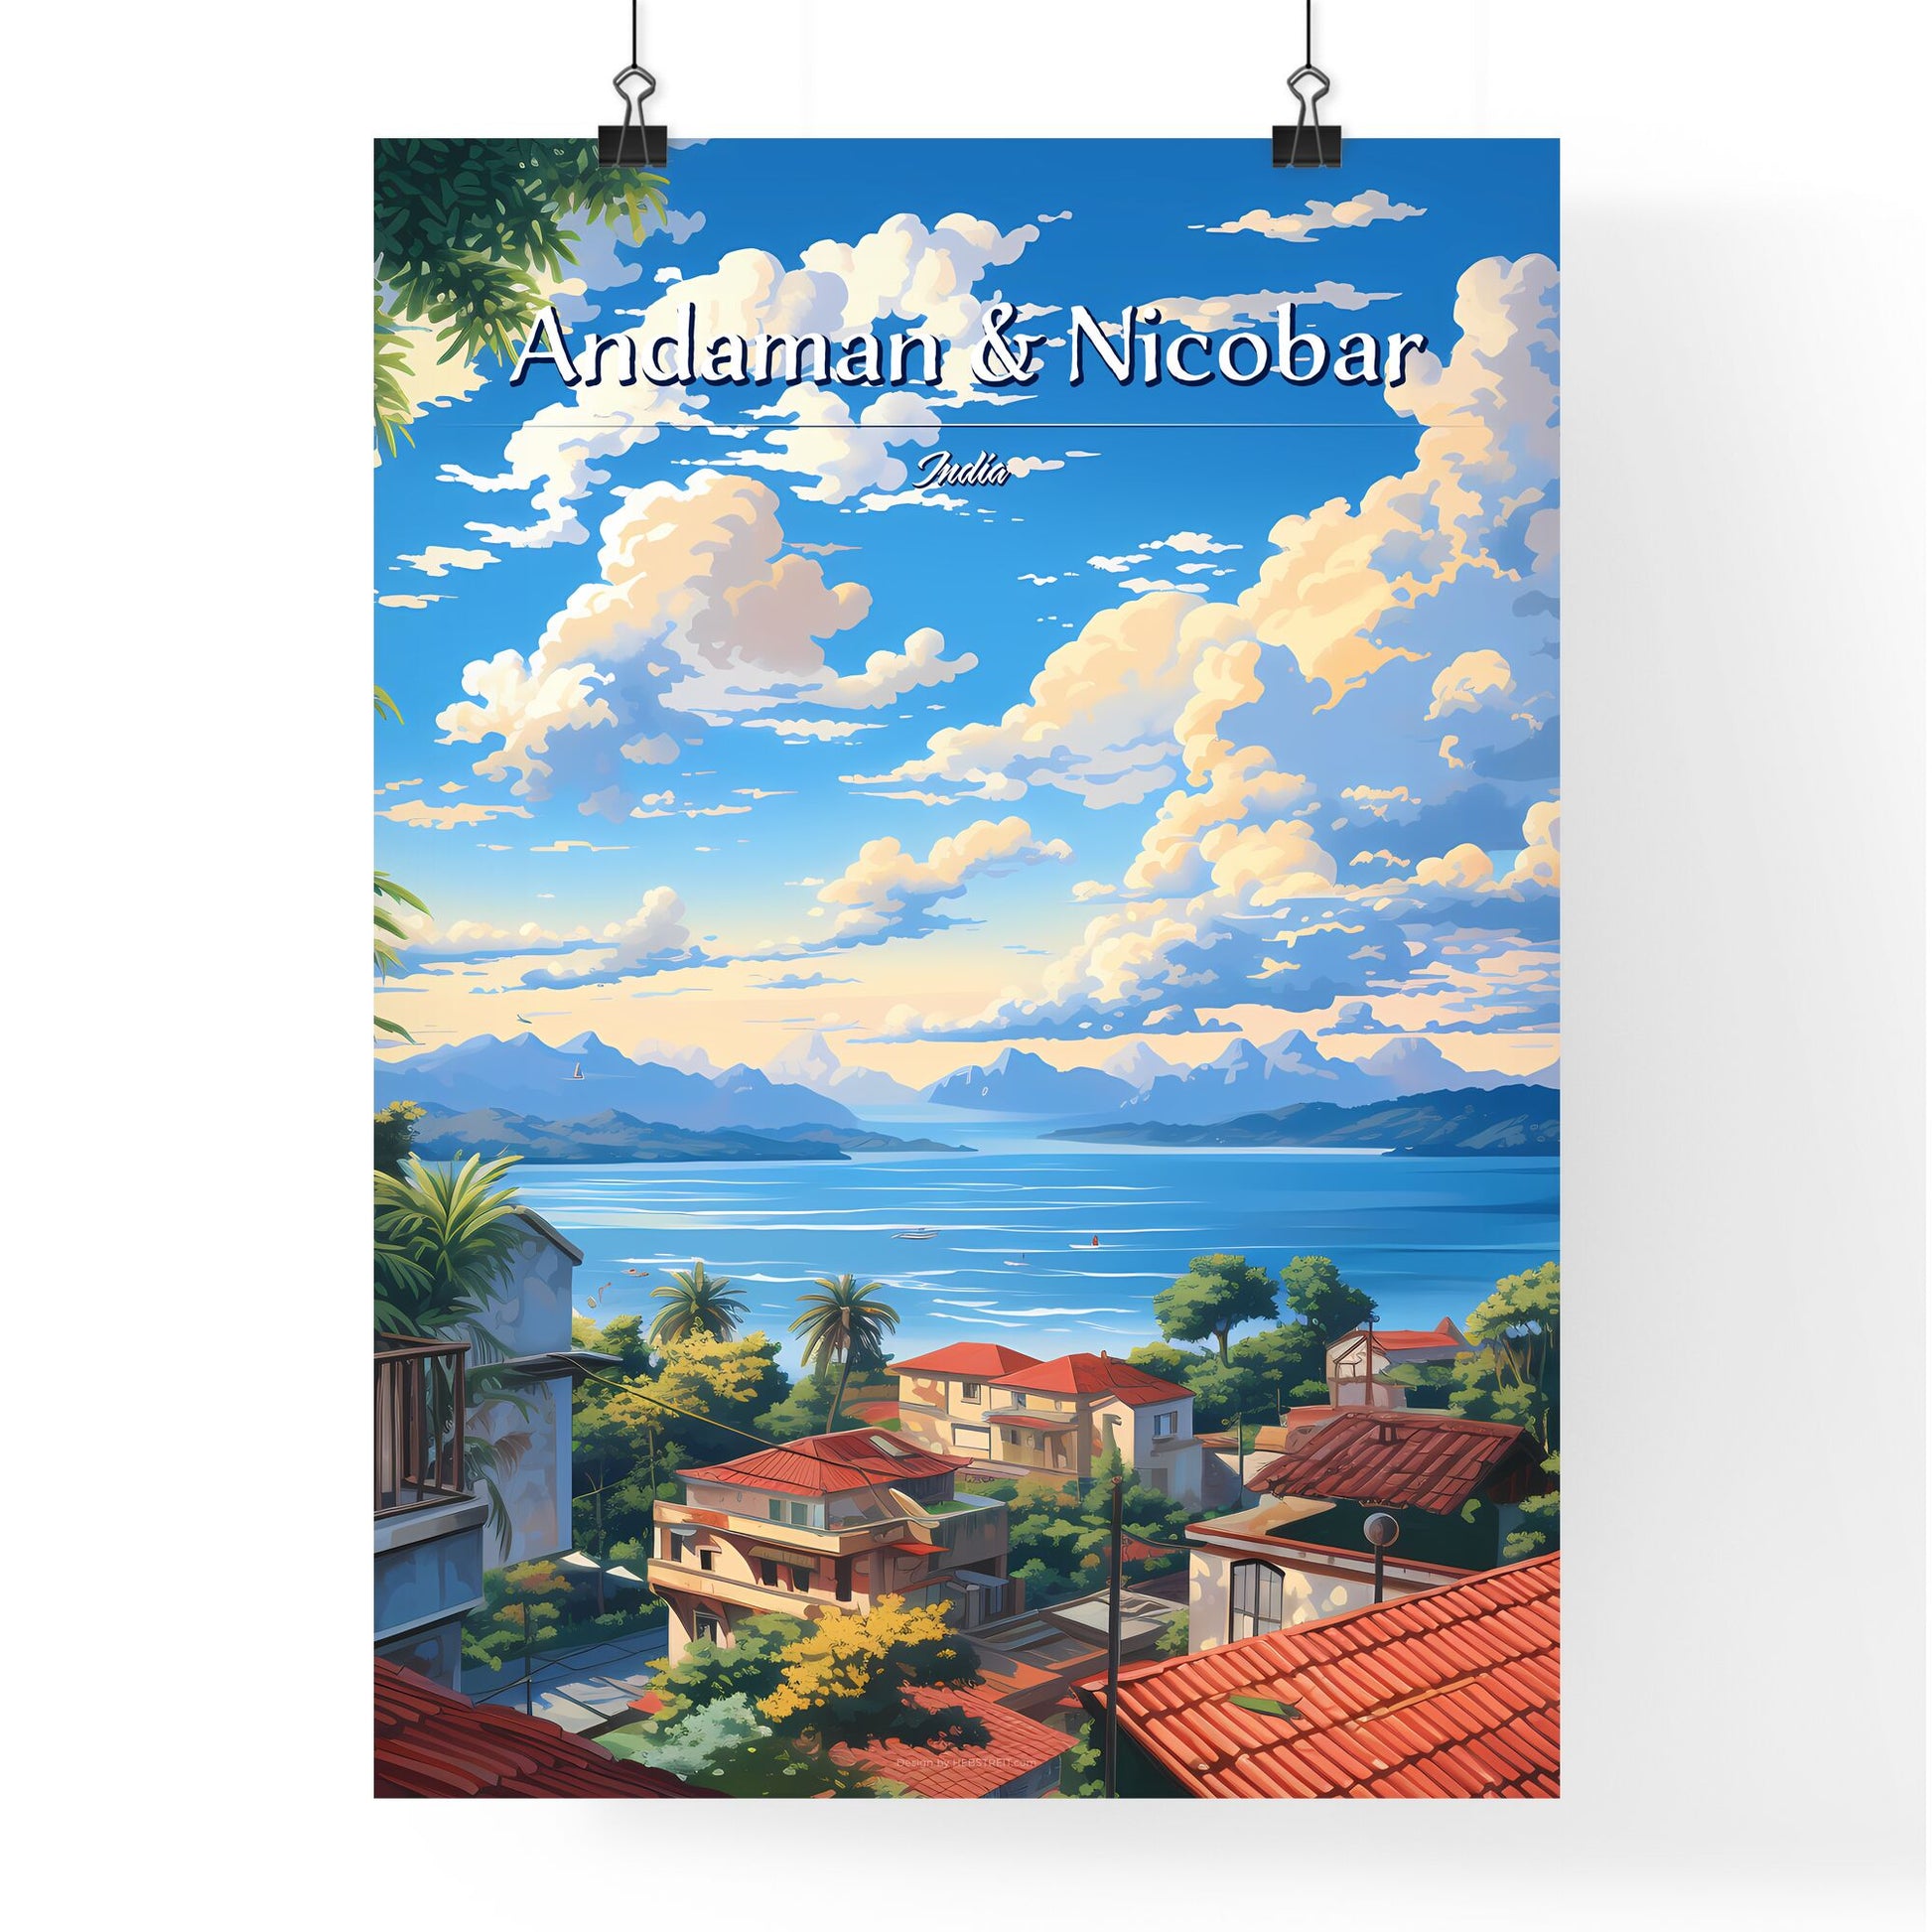 On the roofs of The Andaman & Nicobar Islands, India - Art print of a view of a town with a body of water and mountains Default Title